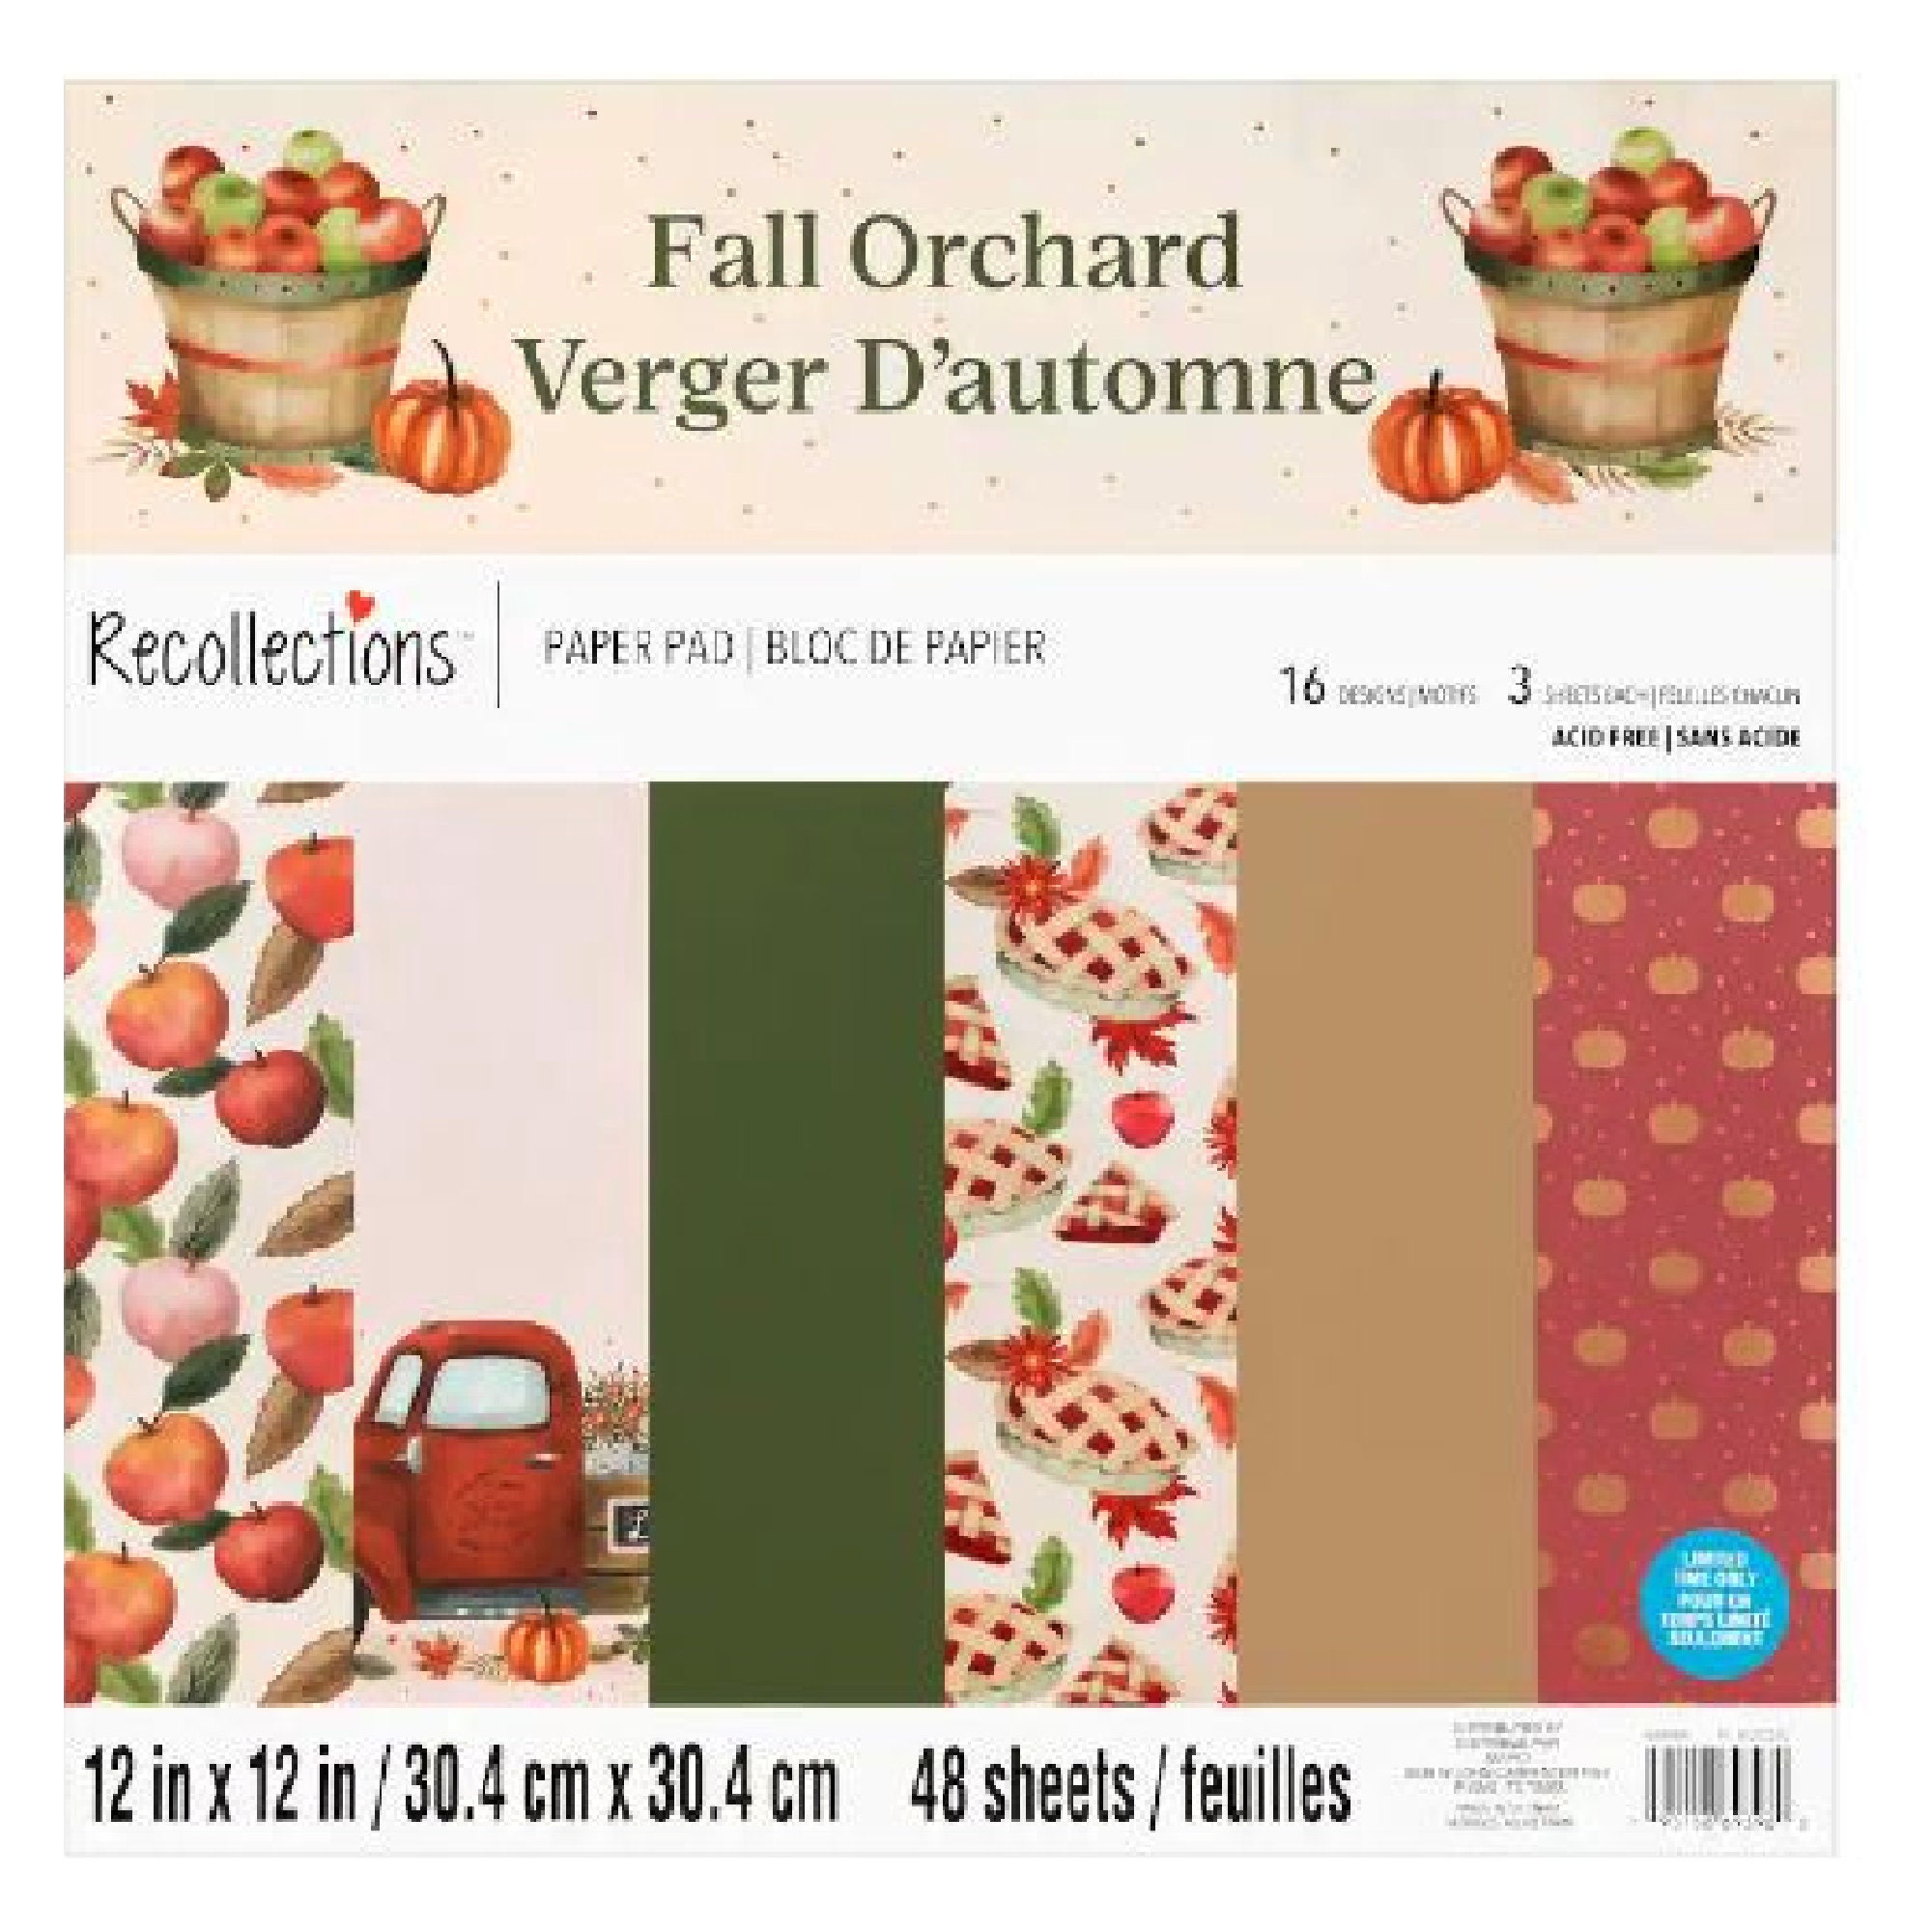 Recollections 12x12 Valentine Scrapbook Paper Pad 48 sheets NEW